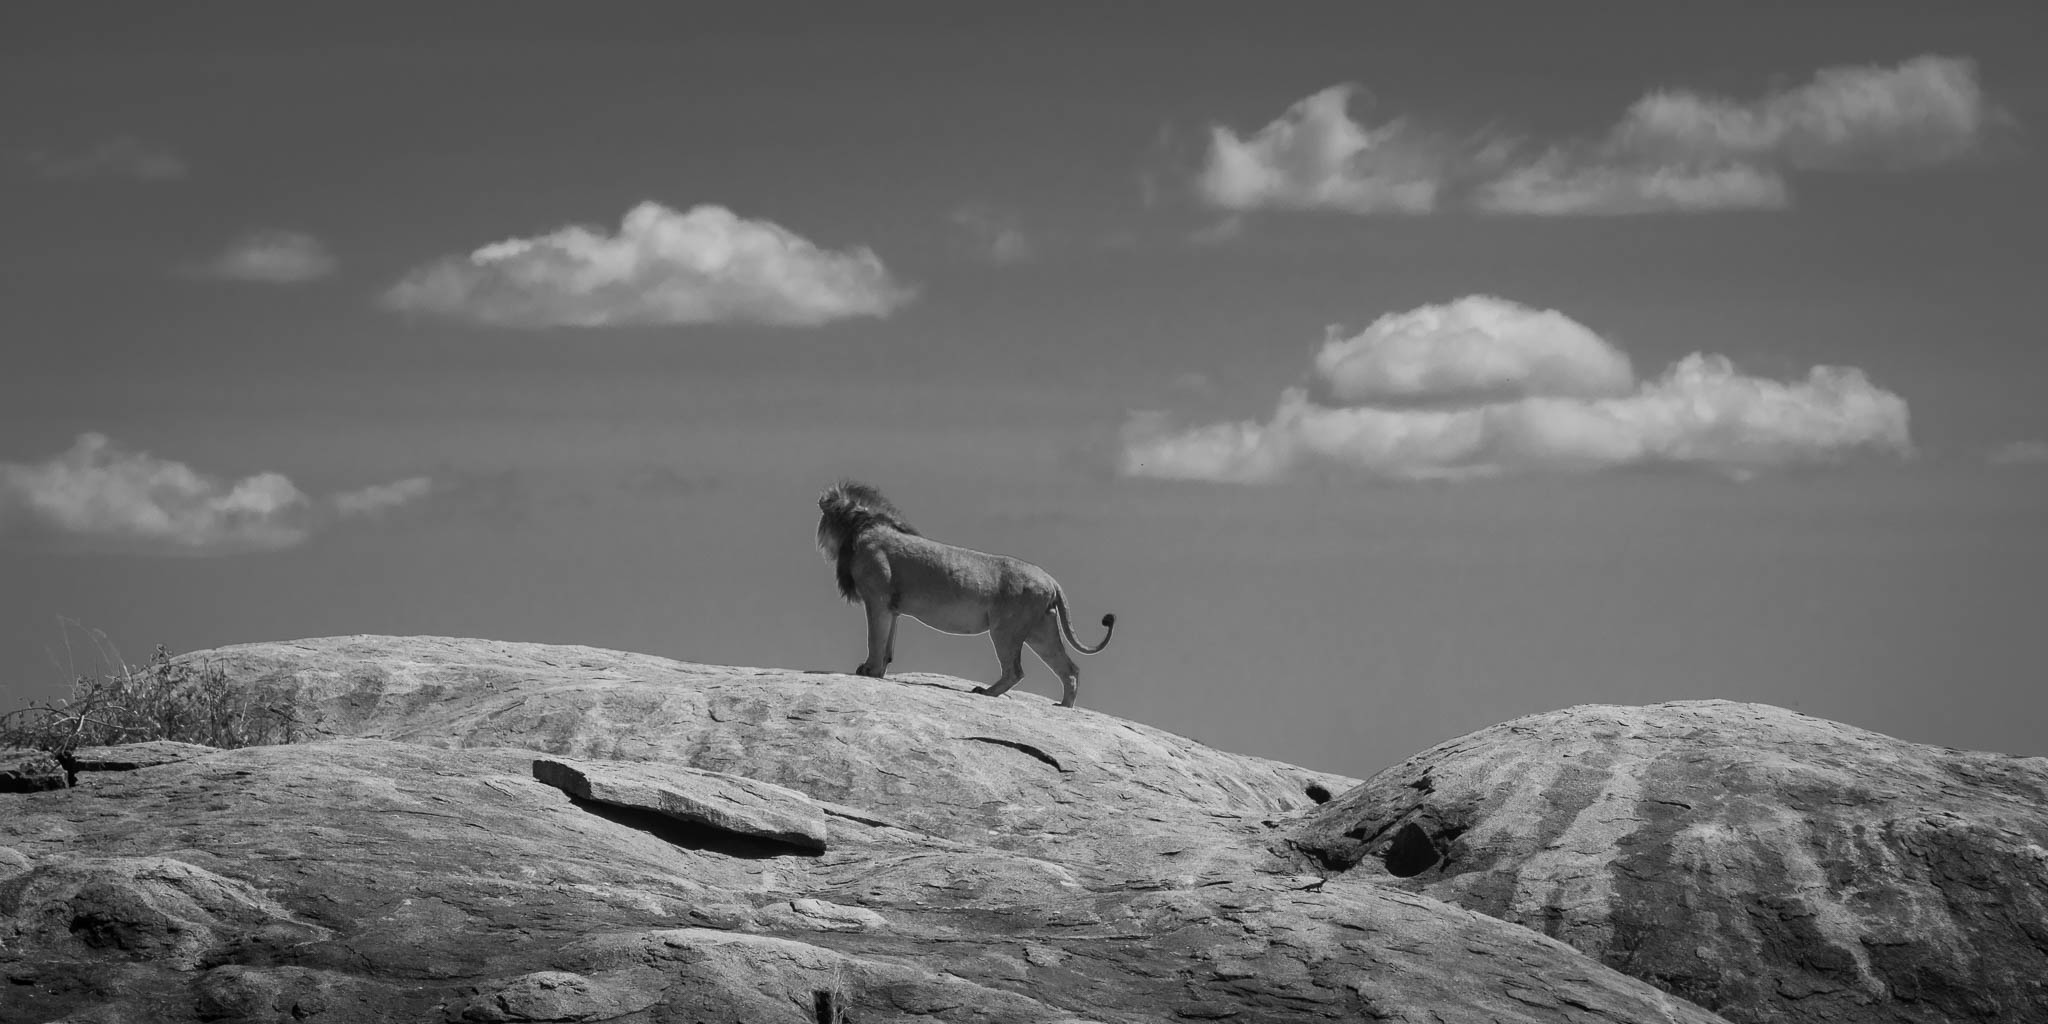 Photographing in the Serengeti